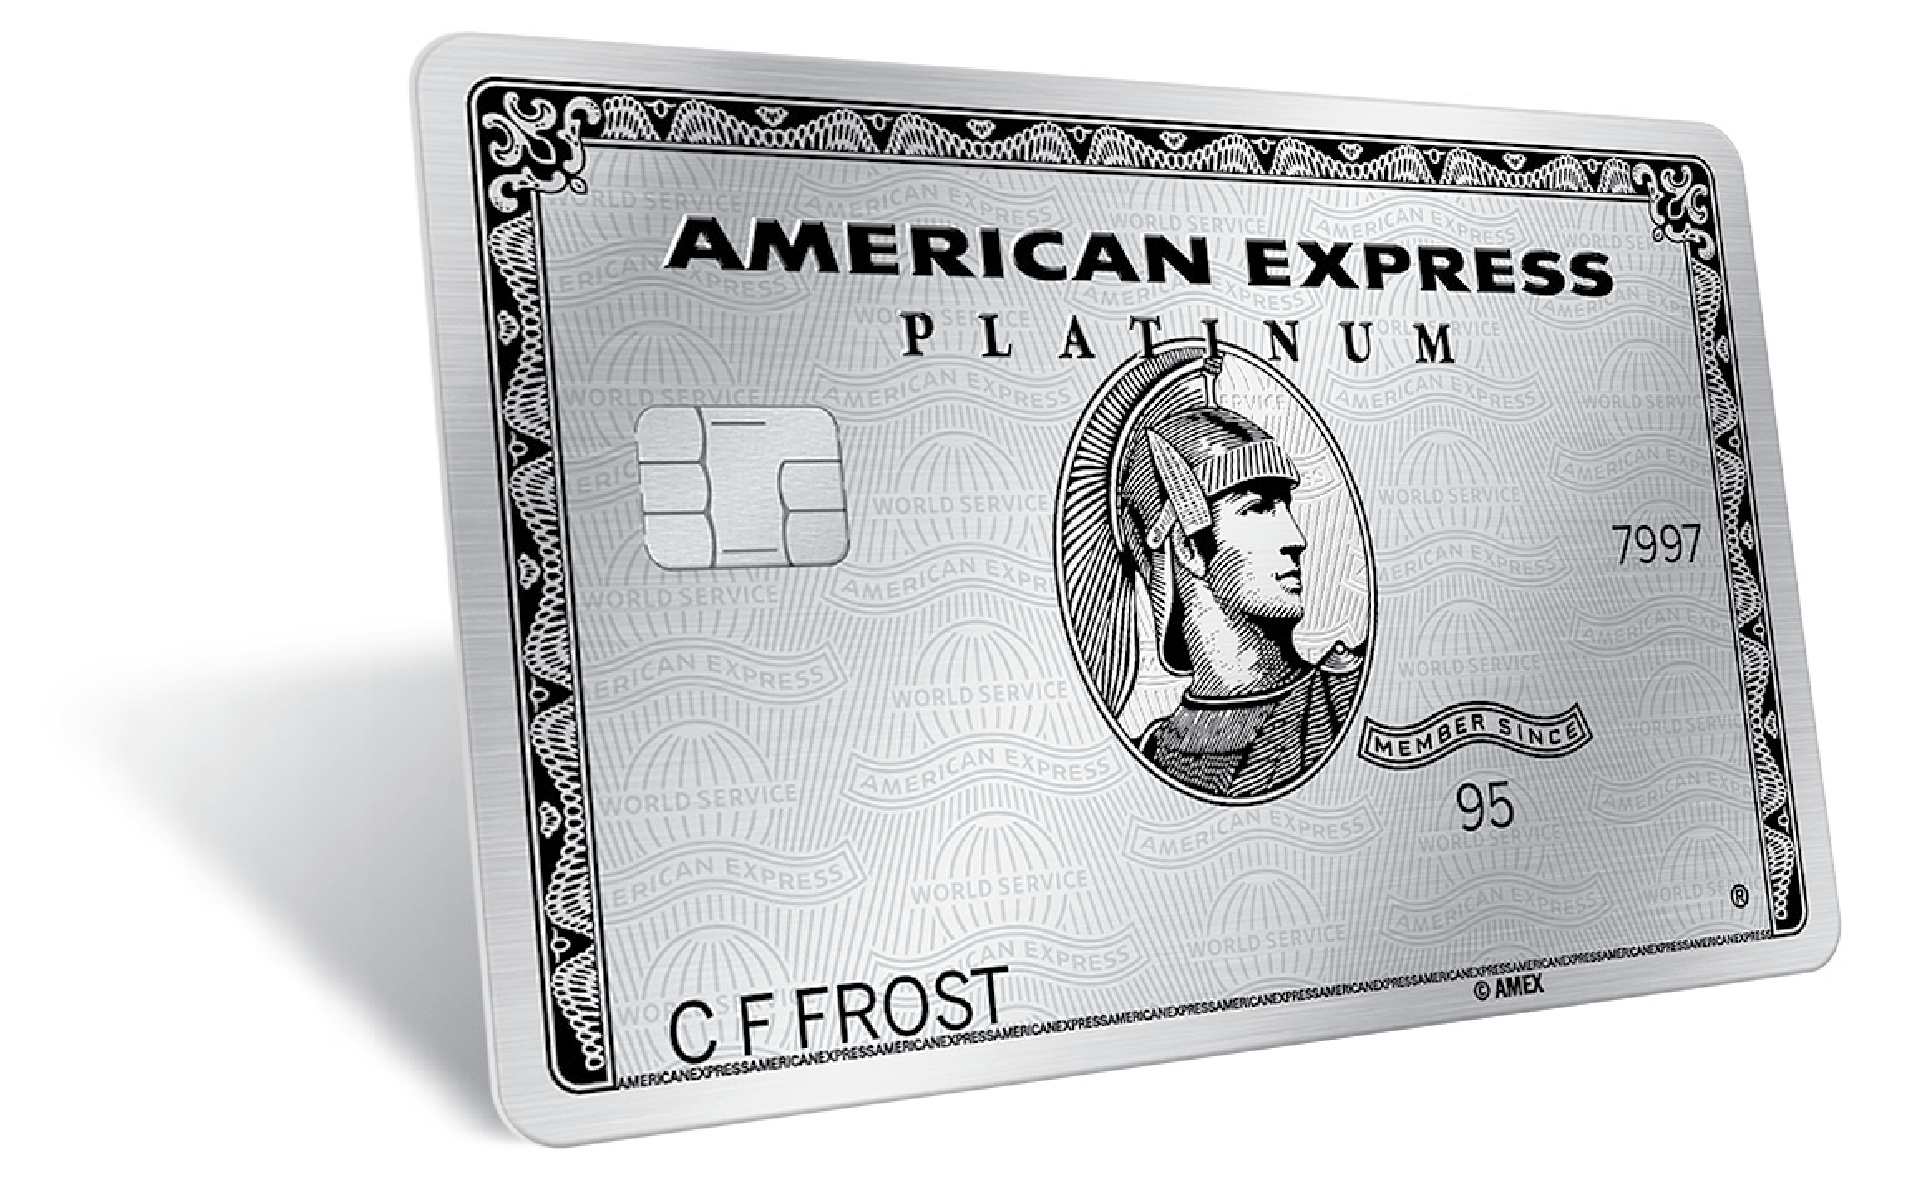 2. American Express - Credit Cards, Rewards, Travel and Business Services - wide 5